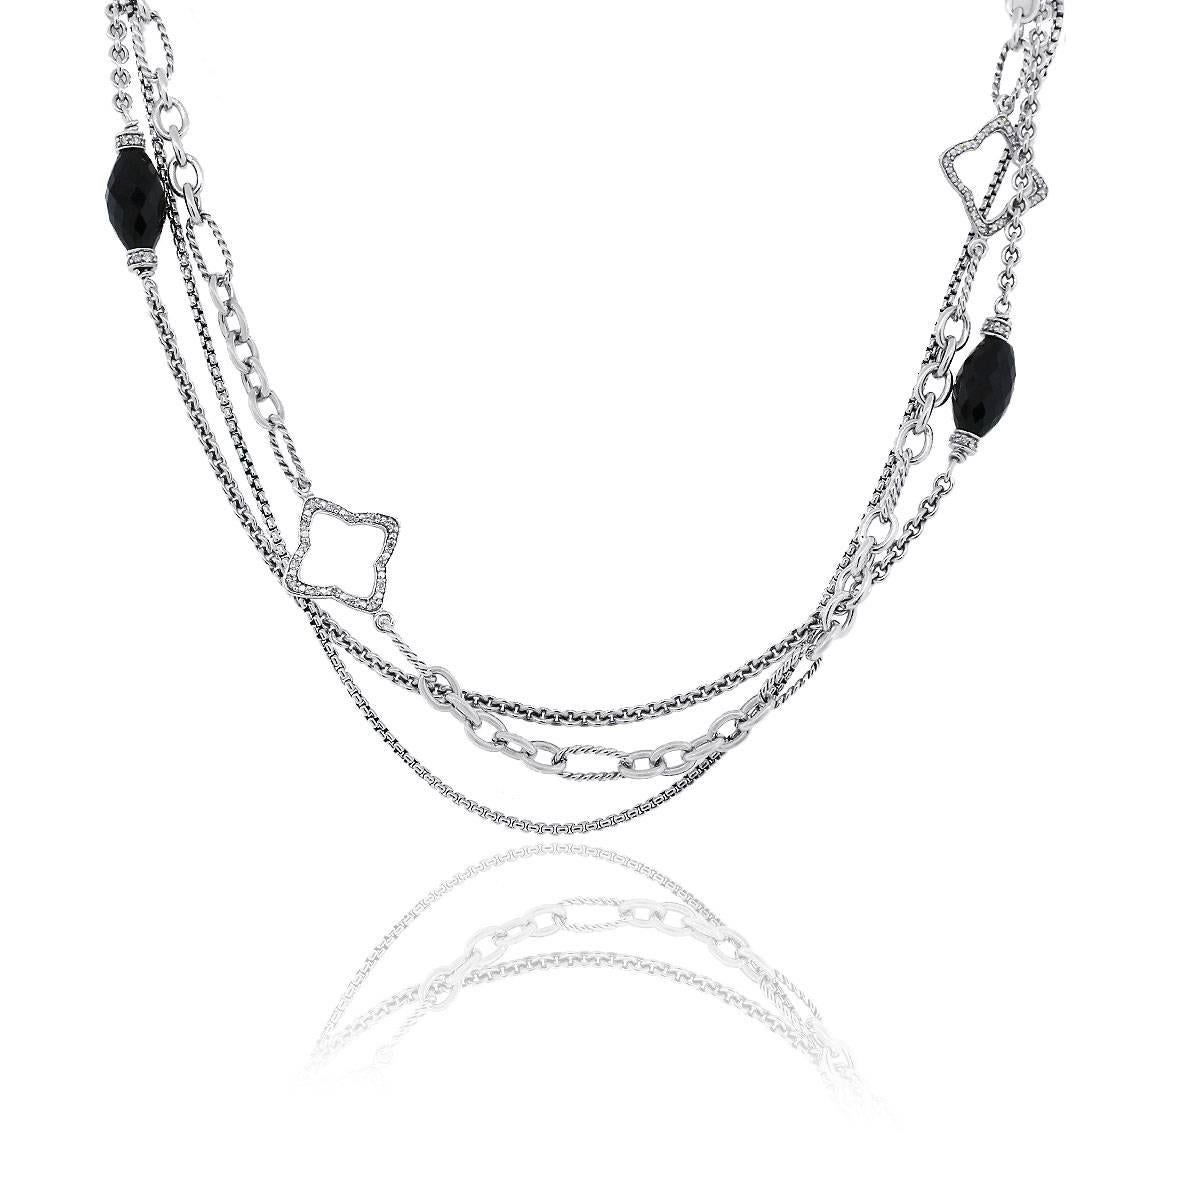 Brand: David Yurman
Material: Sterling Silver
Diamond Details: Diamonds are G/H in color and VS in clarity.
Clasp: Toggle
Measurements: 32″ in length
Total Weight: 66.4g (42.7dwt)
SKU: G7370